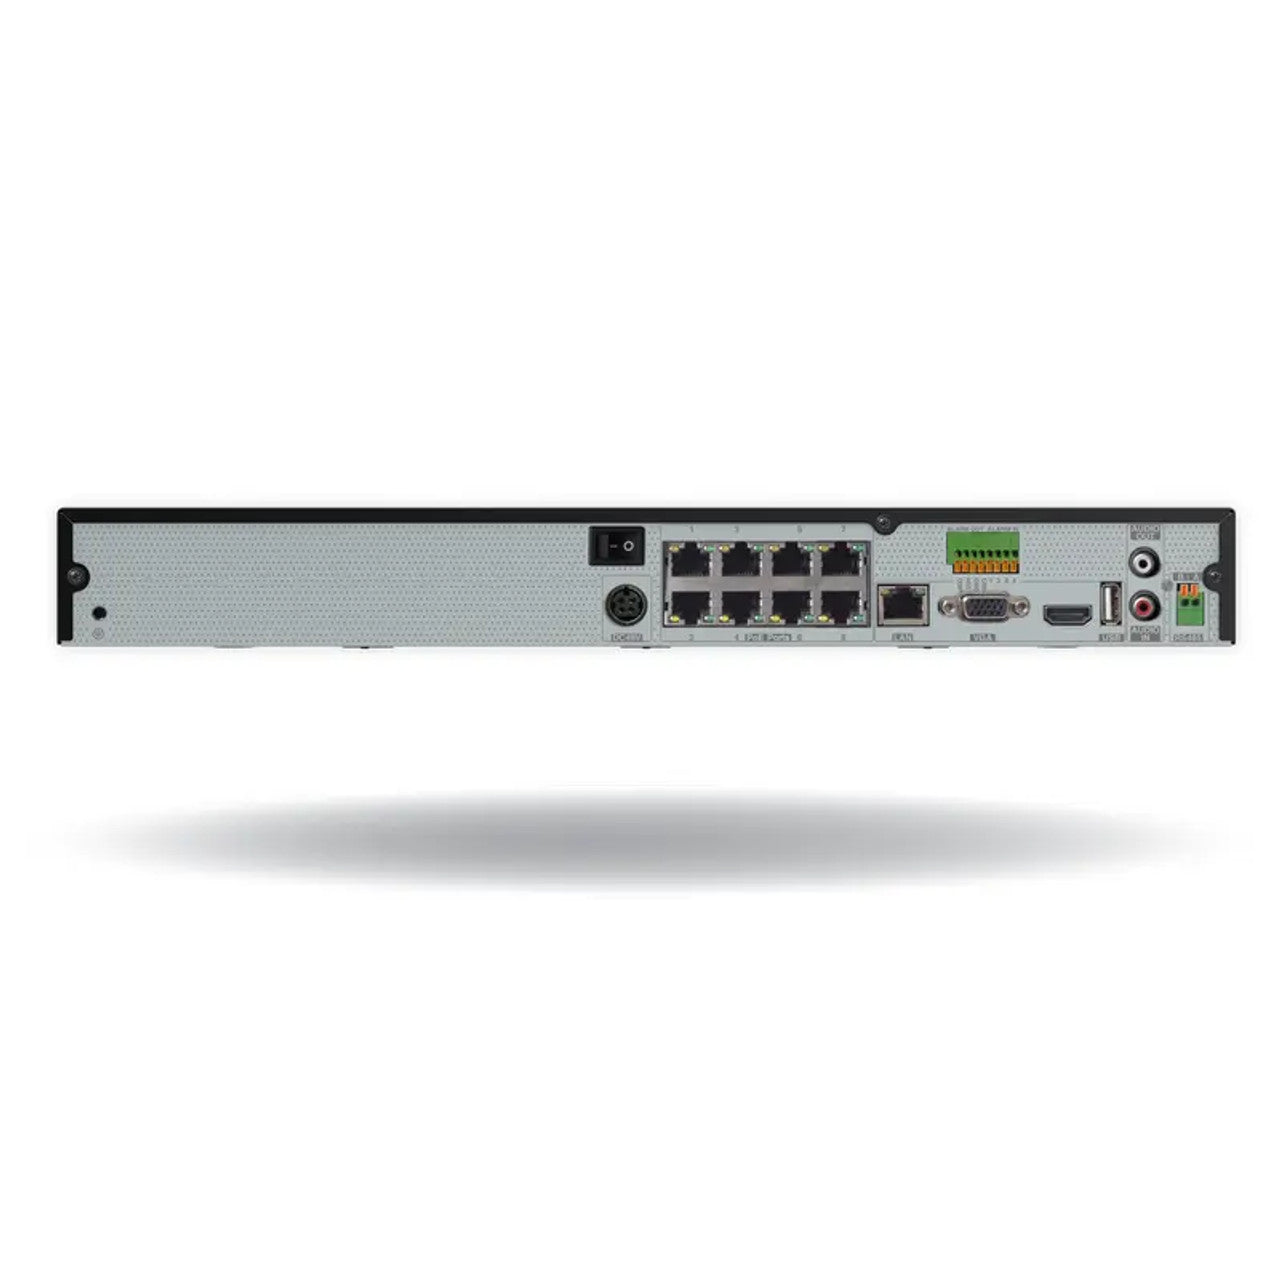 Digital Watchdog DW-VG41220T8P VMAX IP G4 8 Channel PoE NVR with 4 bonus channels with 20TB Hard Drive, 12-Channel